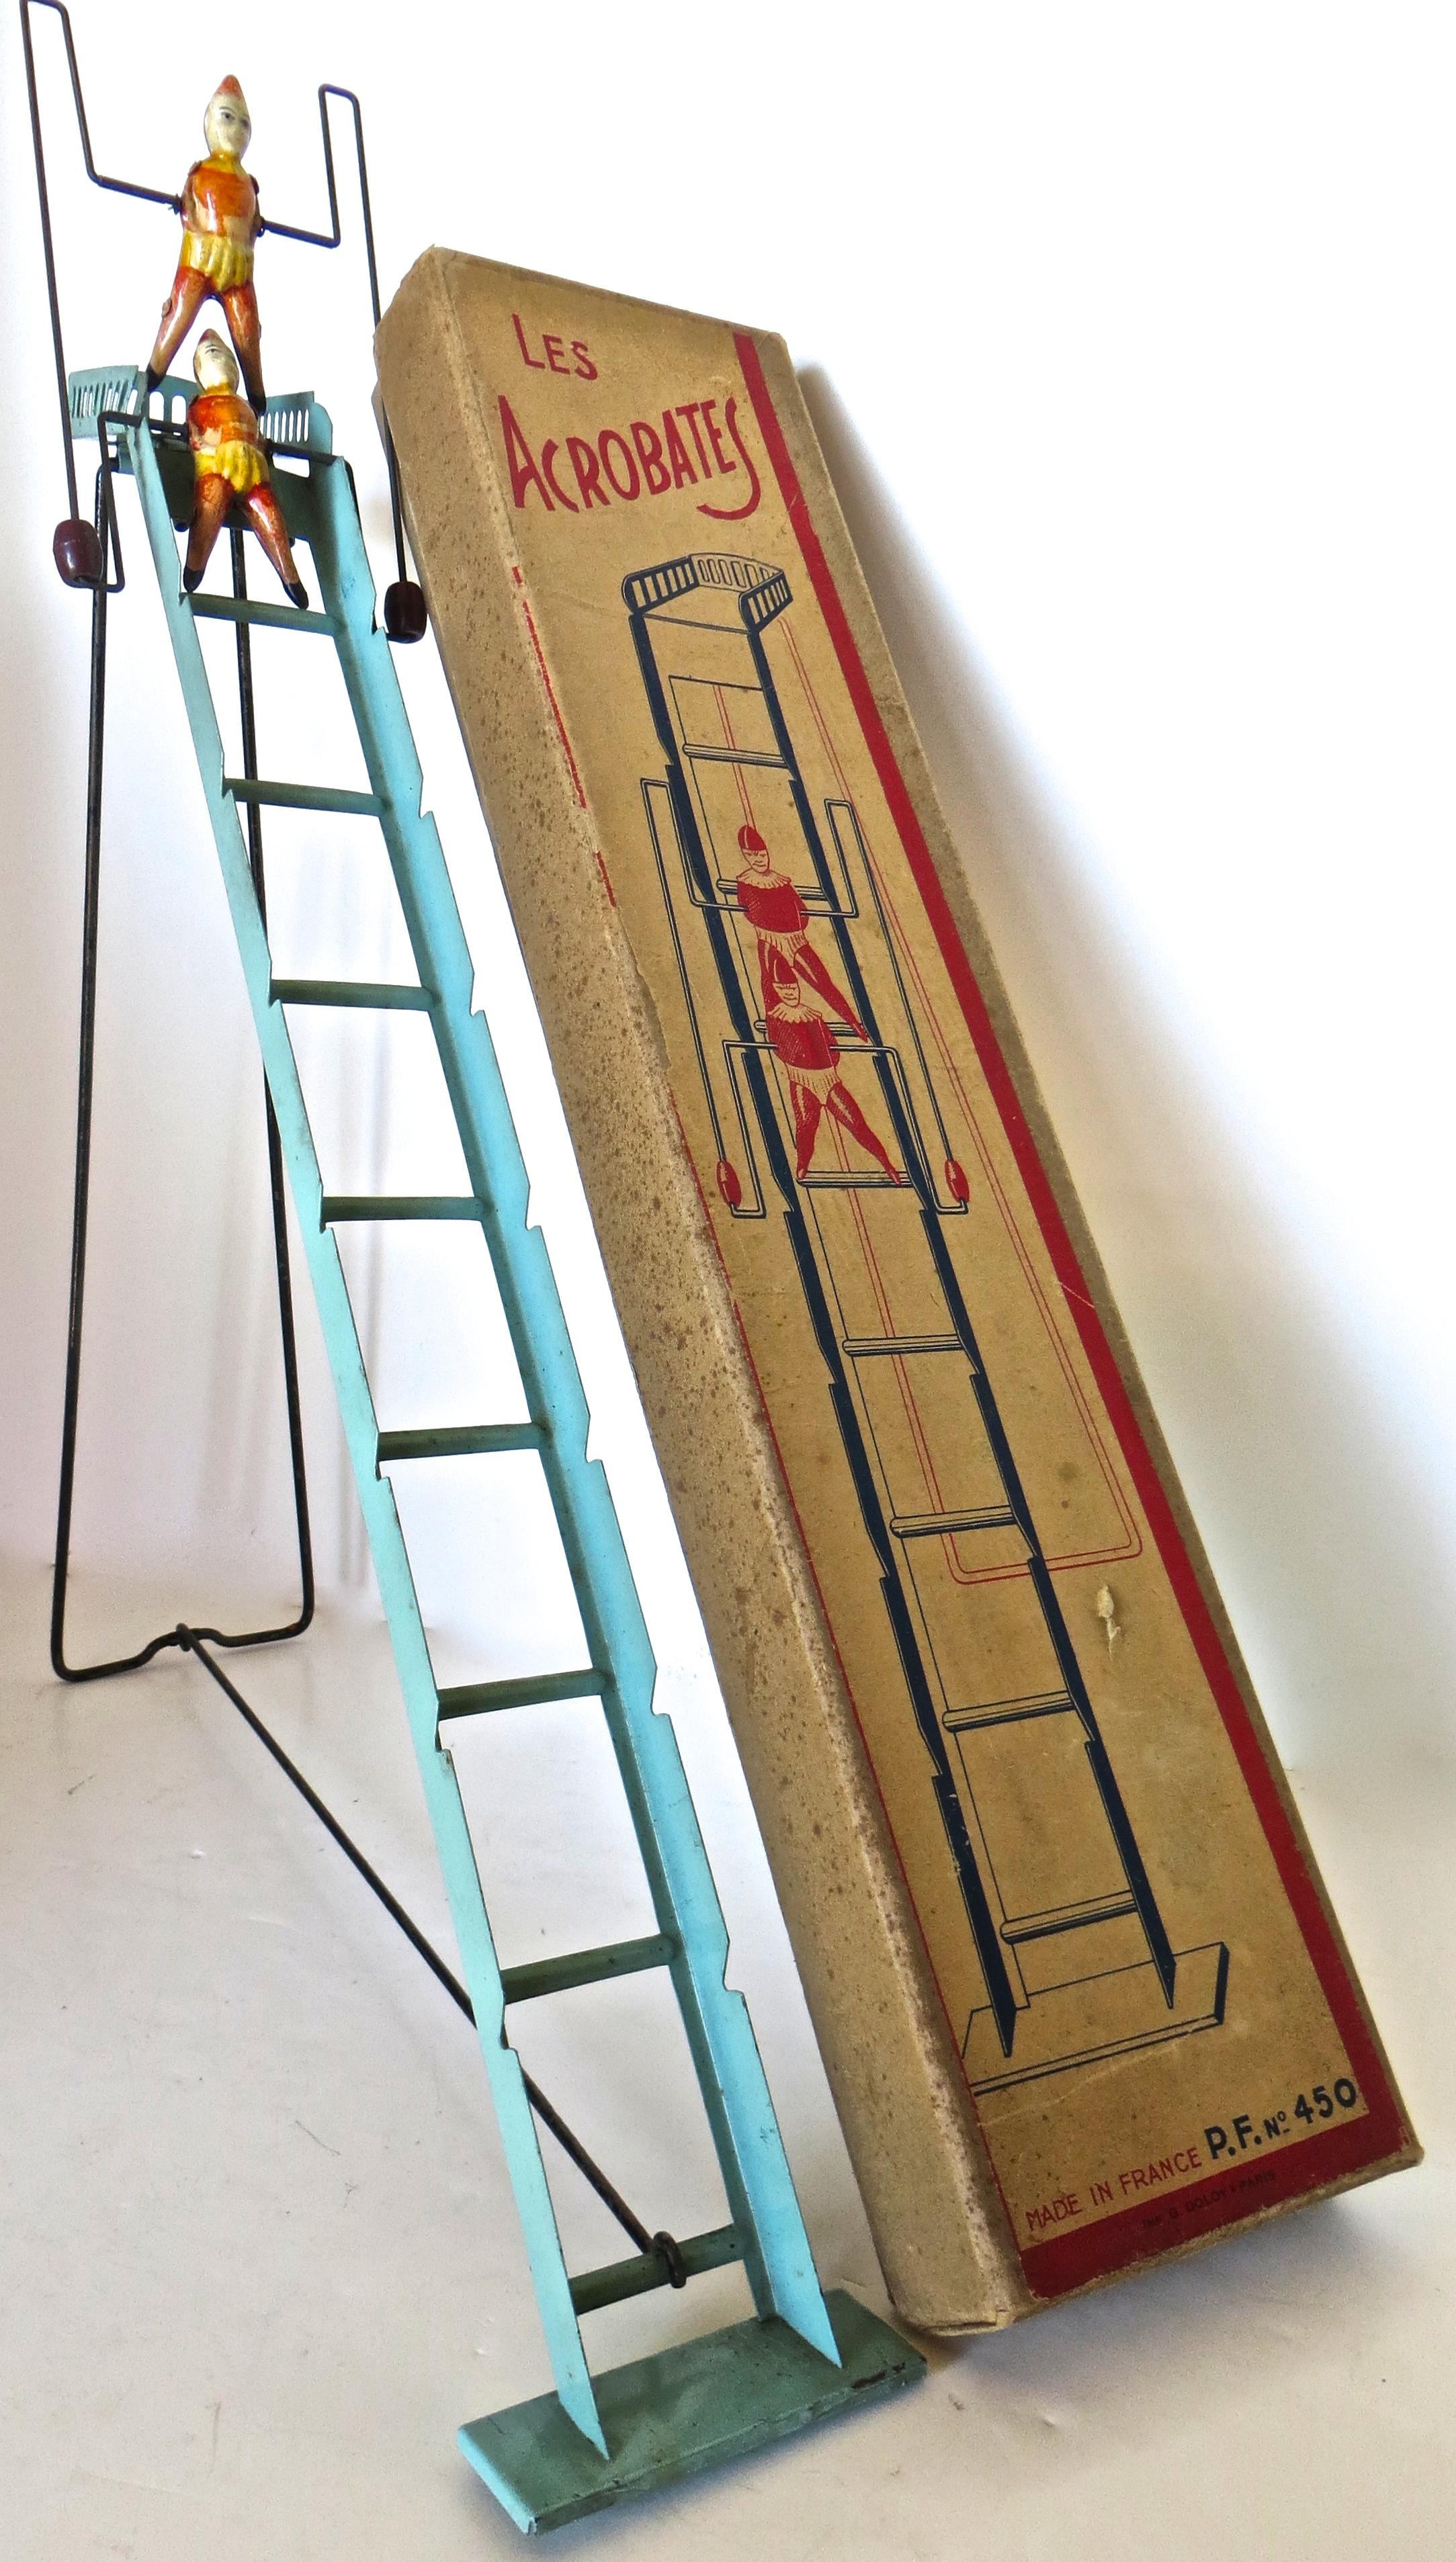 Rare 100 year old French toy in it's original box depicting two acrobats attached to a wire frame with brown barrel weights, cascading down a green metal ladder. Once assembled (loop the hand-painted black support frame over the bottom rung of the